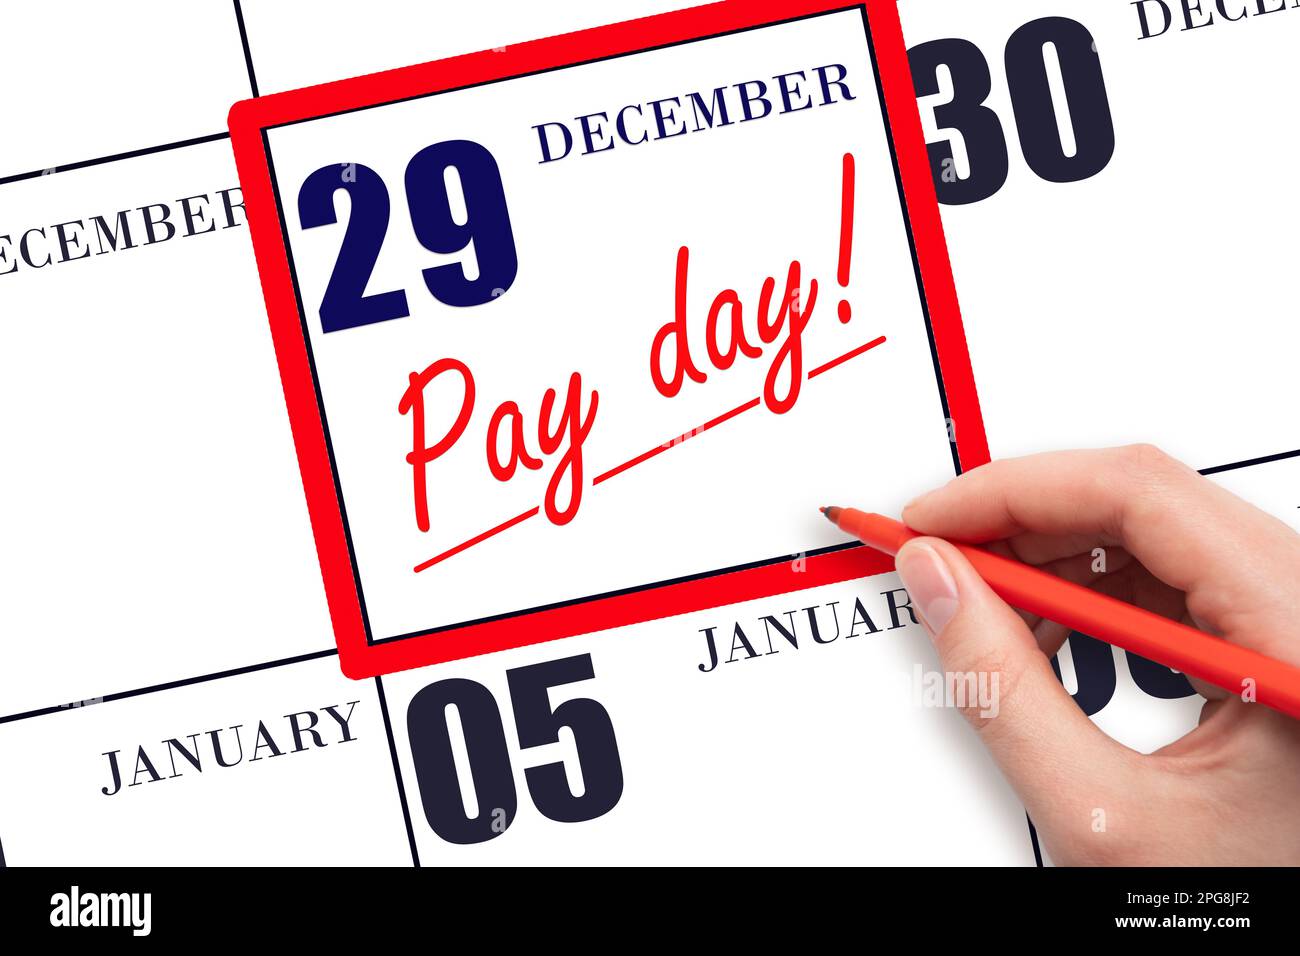 29th day of December. Hand writing text PAY DATE on calendar date December 29 and underline it. Payment due date. Reminder concept of payment. Winter Stock Photo